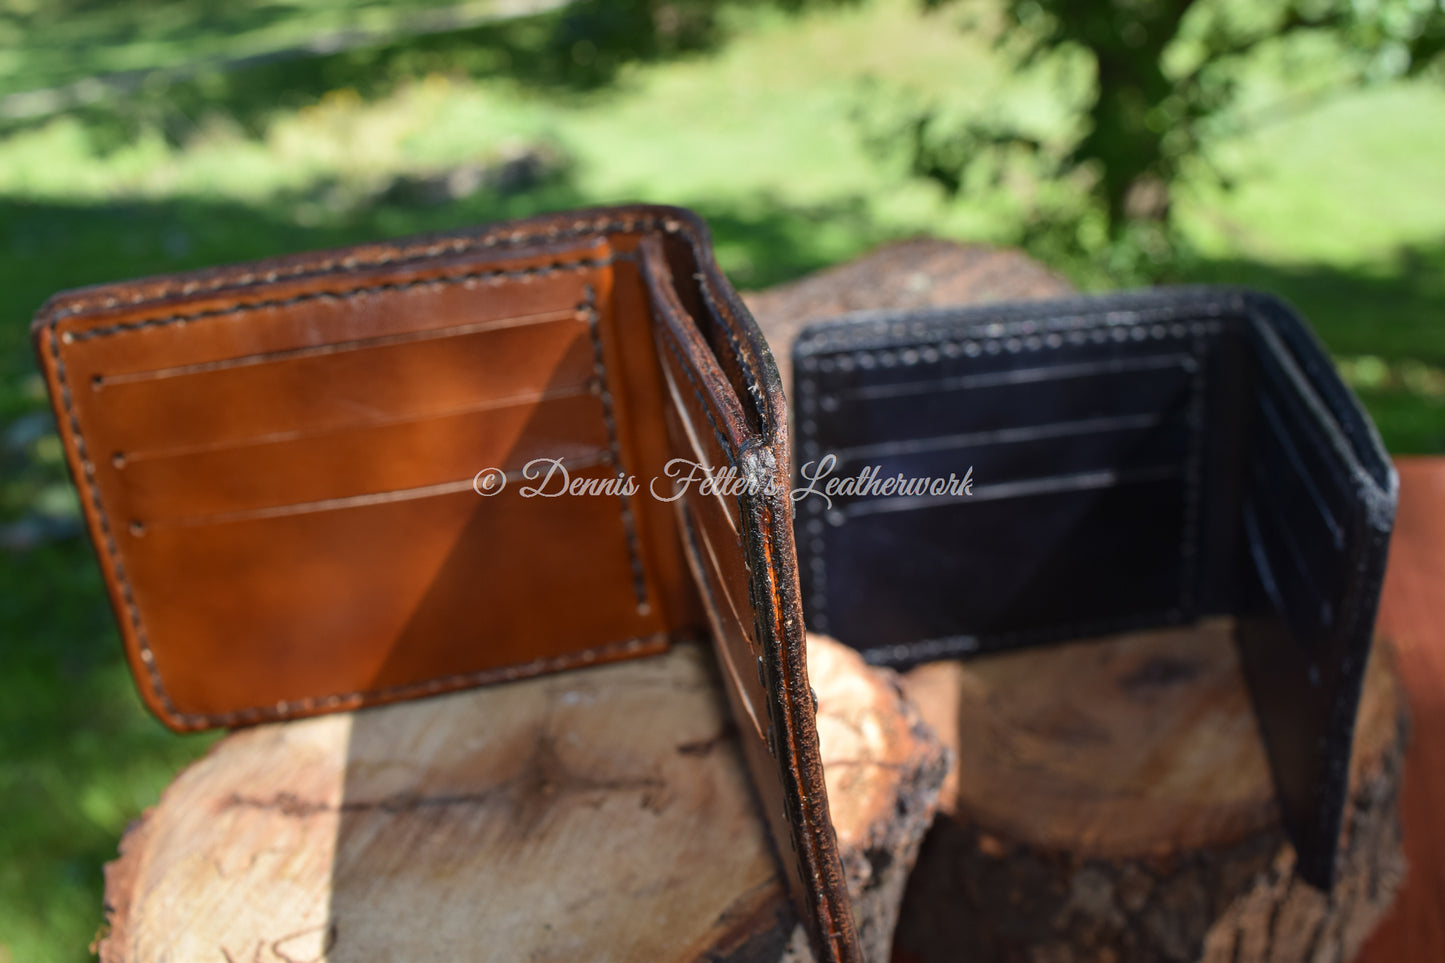 inside view of pockets on both black and brown leather wallets